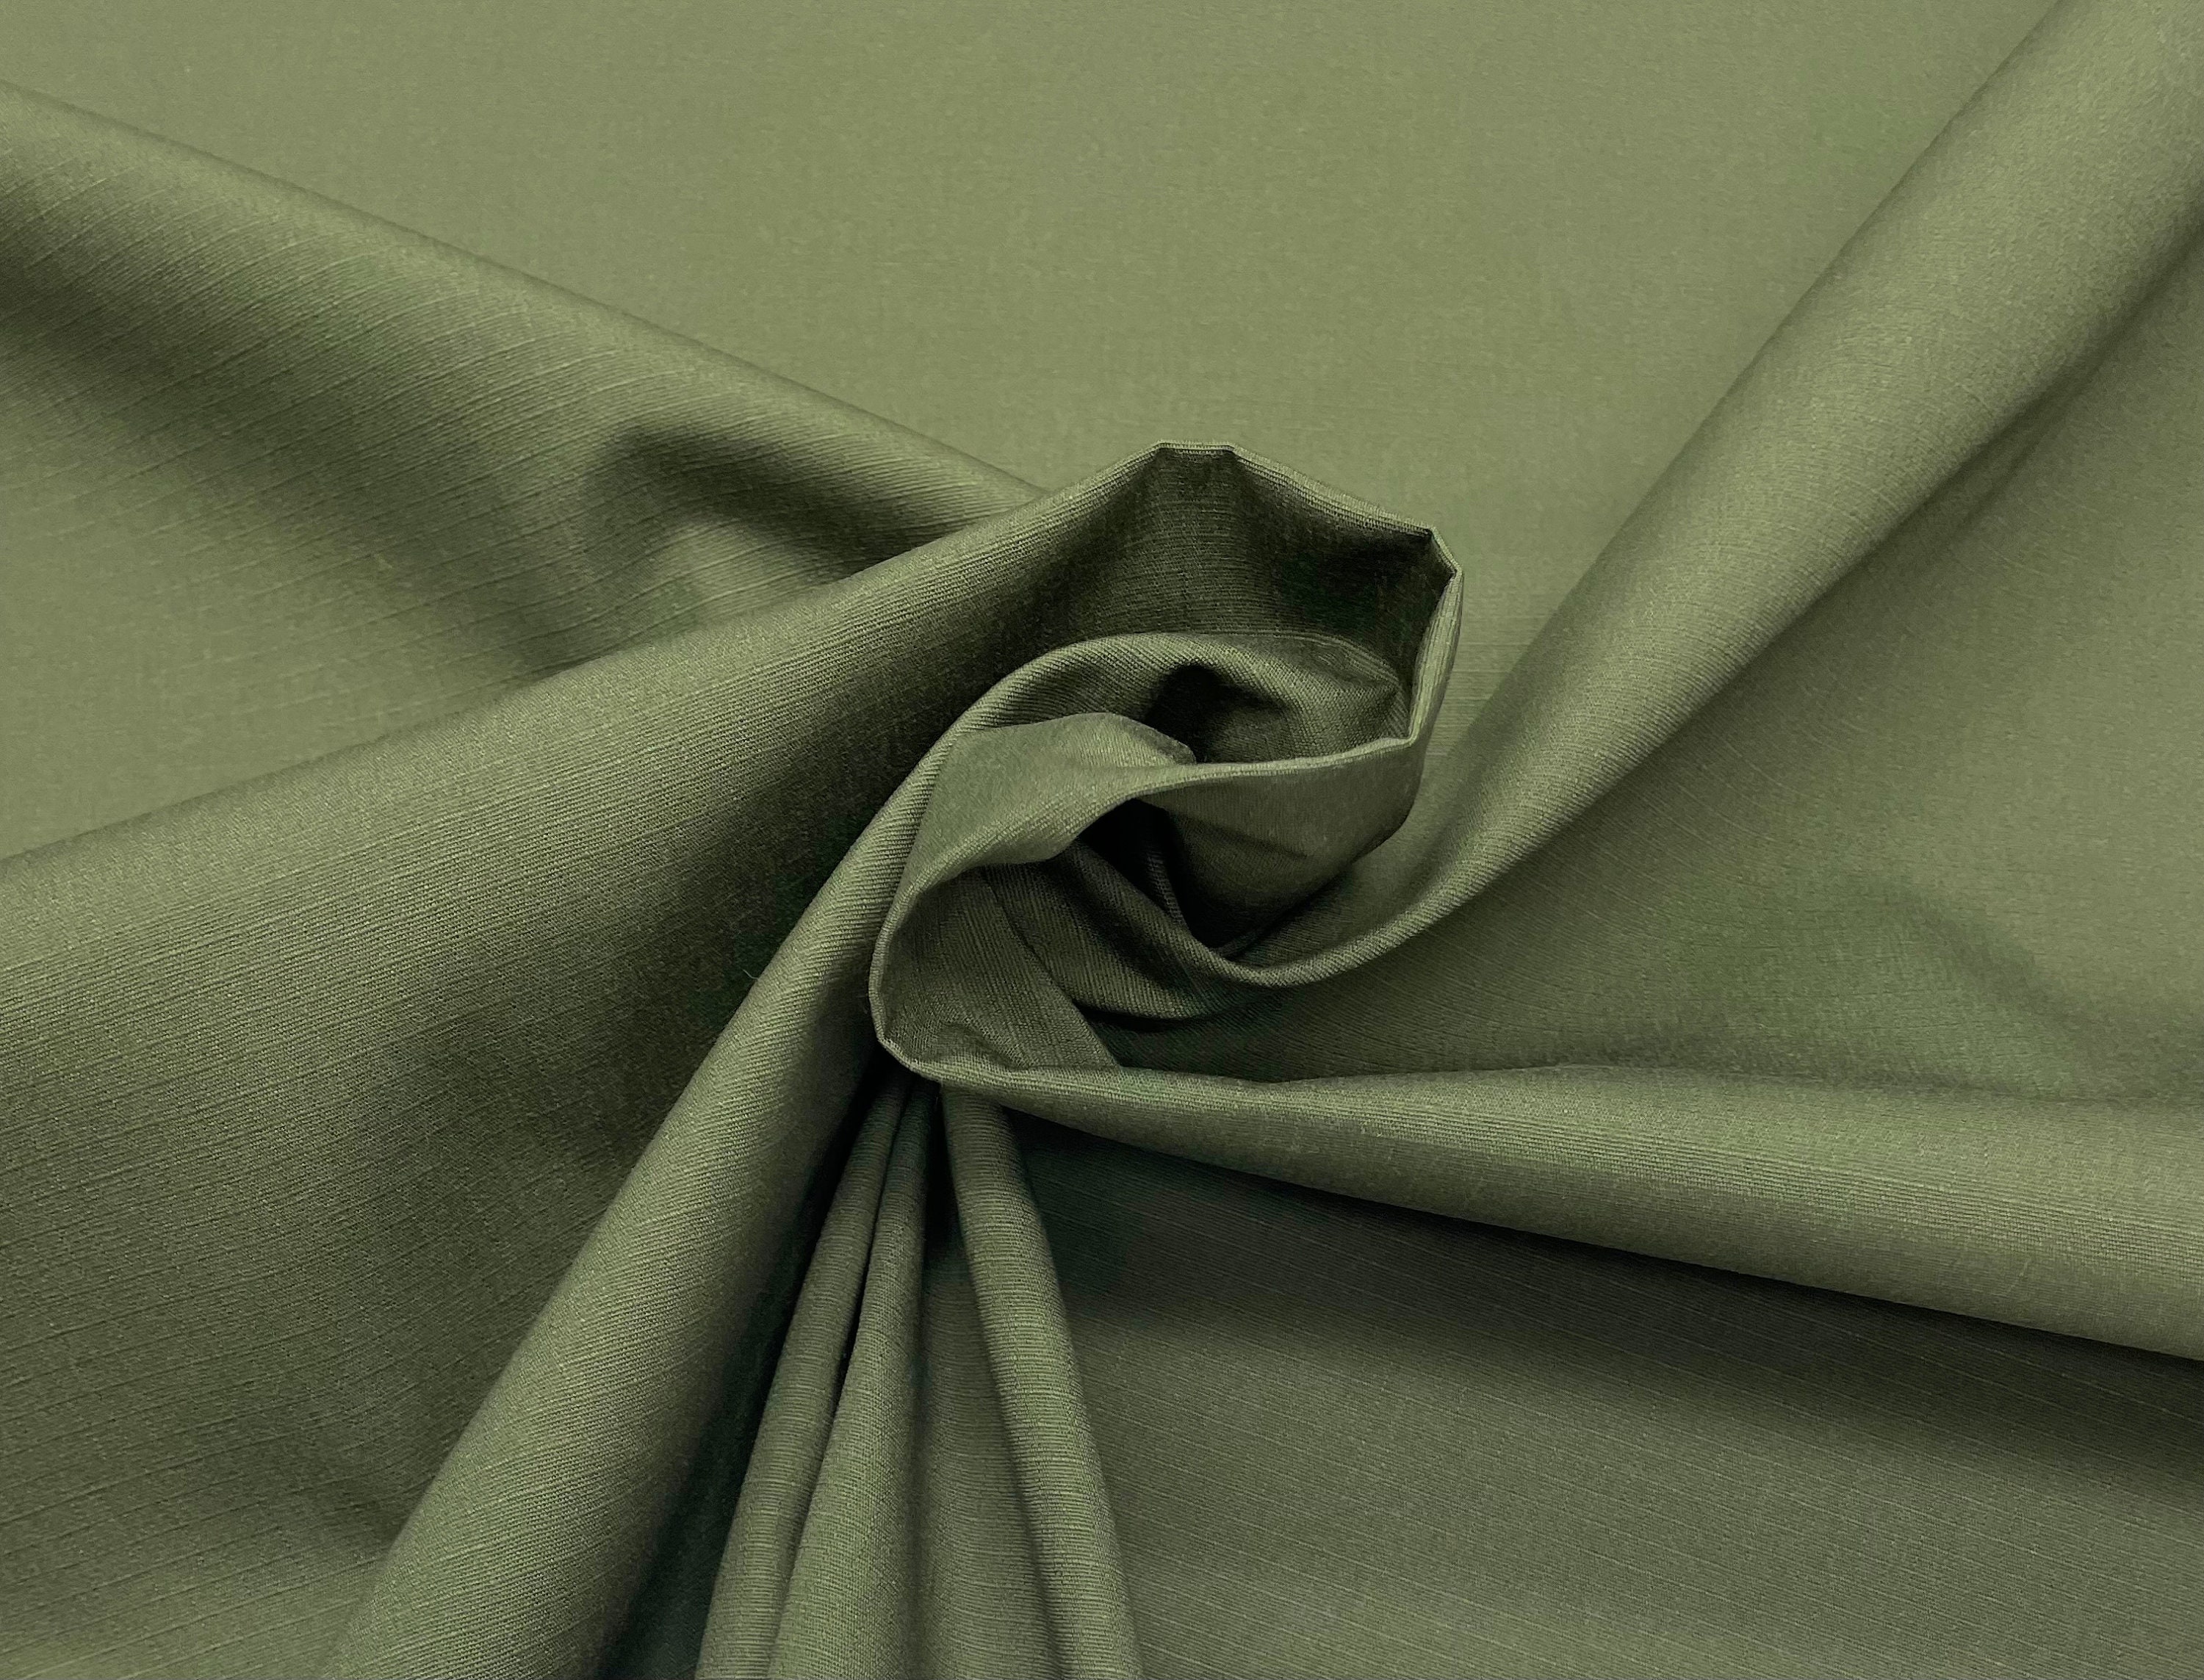 Fabric Pure Cotton Elastane Manchester Corduroy Olive Cable